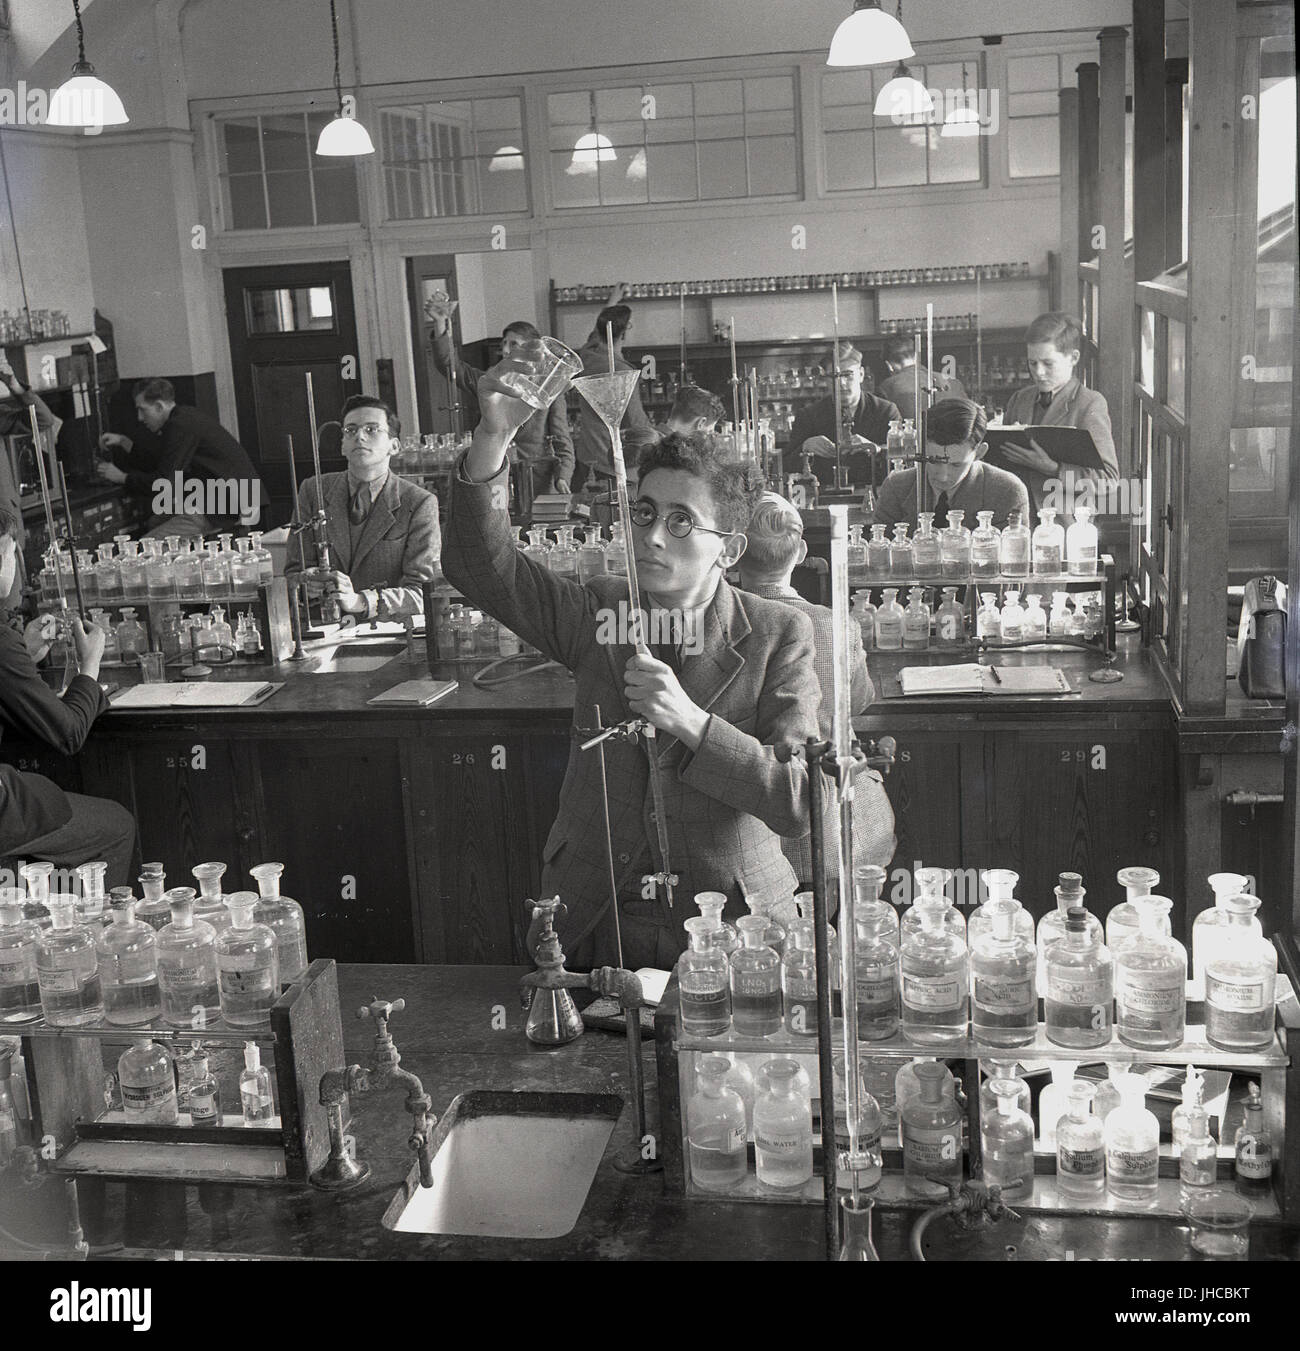 1950s, historical, school boys doing chemistry experiments in a well-stocked science laboratory at Mill Hill Public school, a traditional Briitsh boys only fee paying boarding school in North London, England, UK. Stock Photo